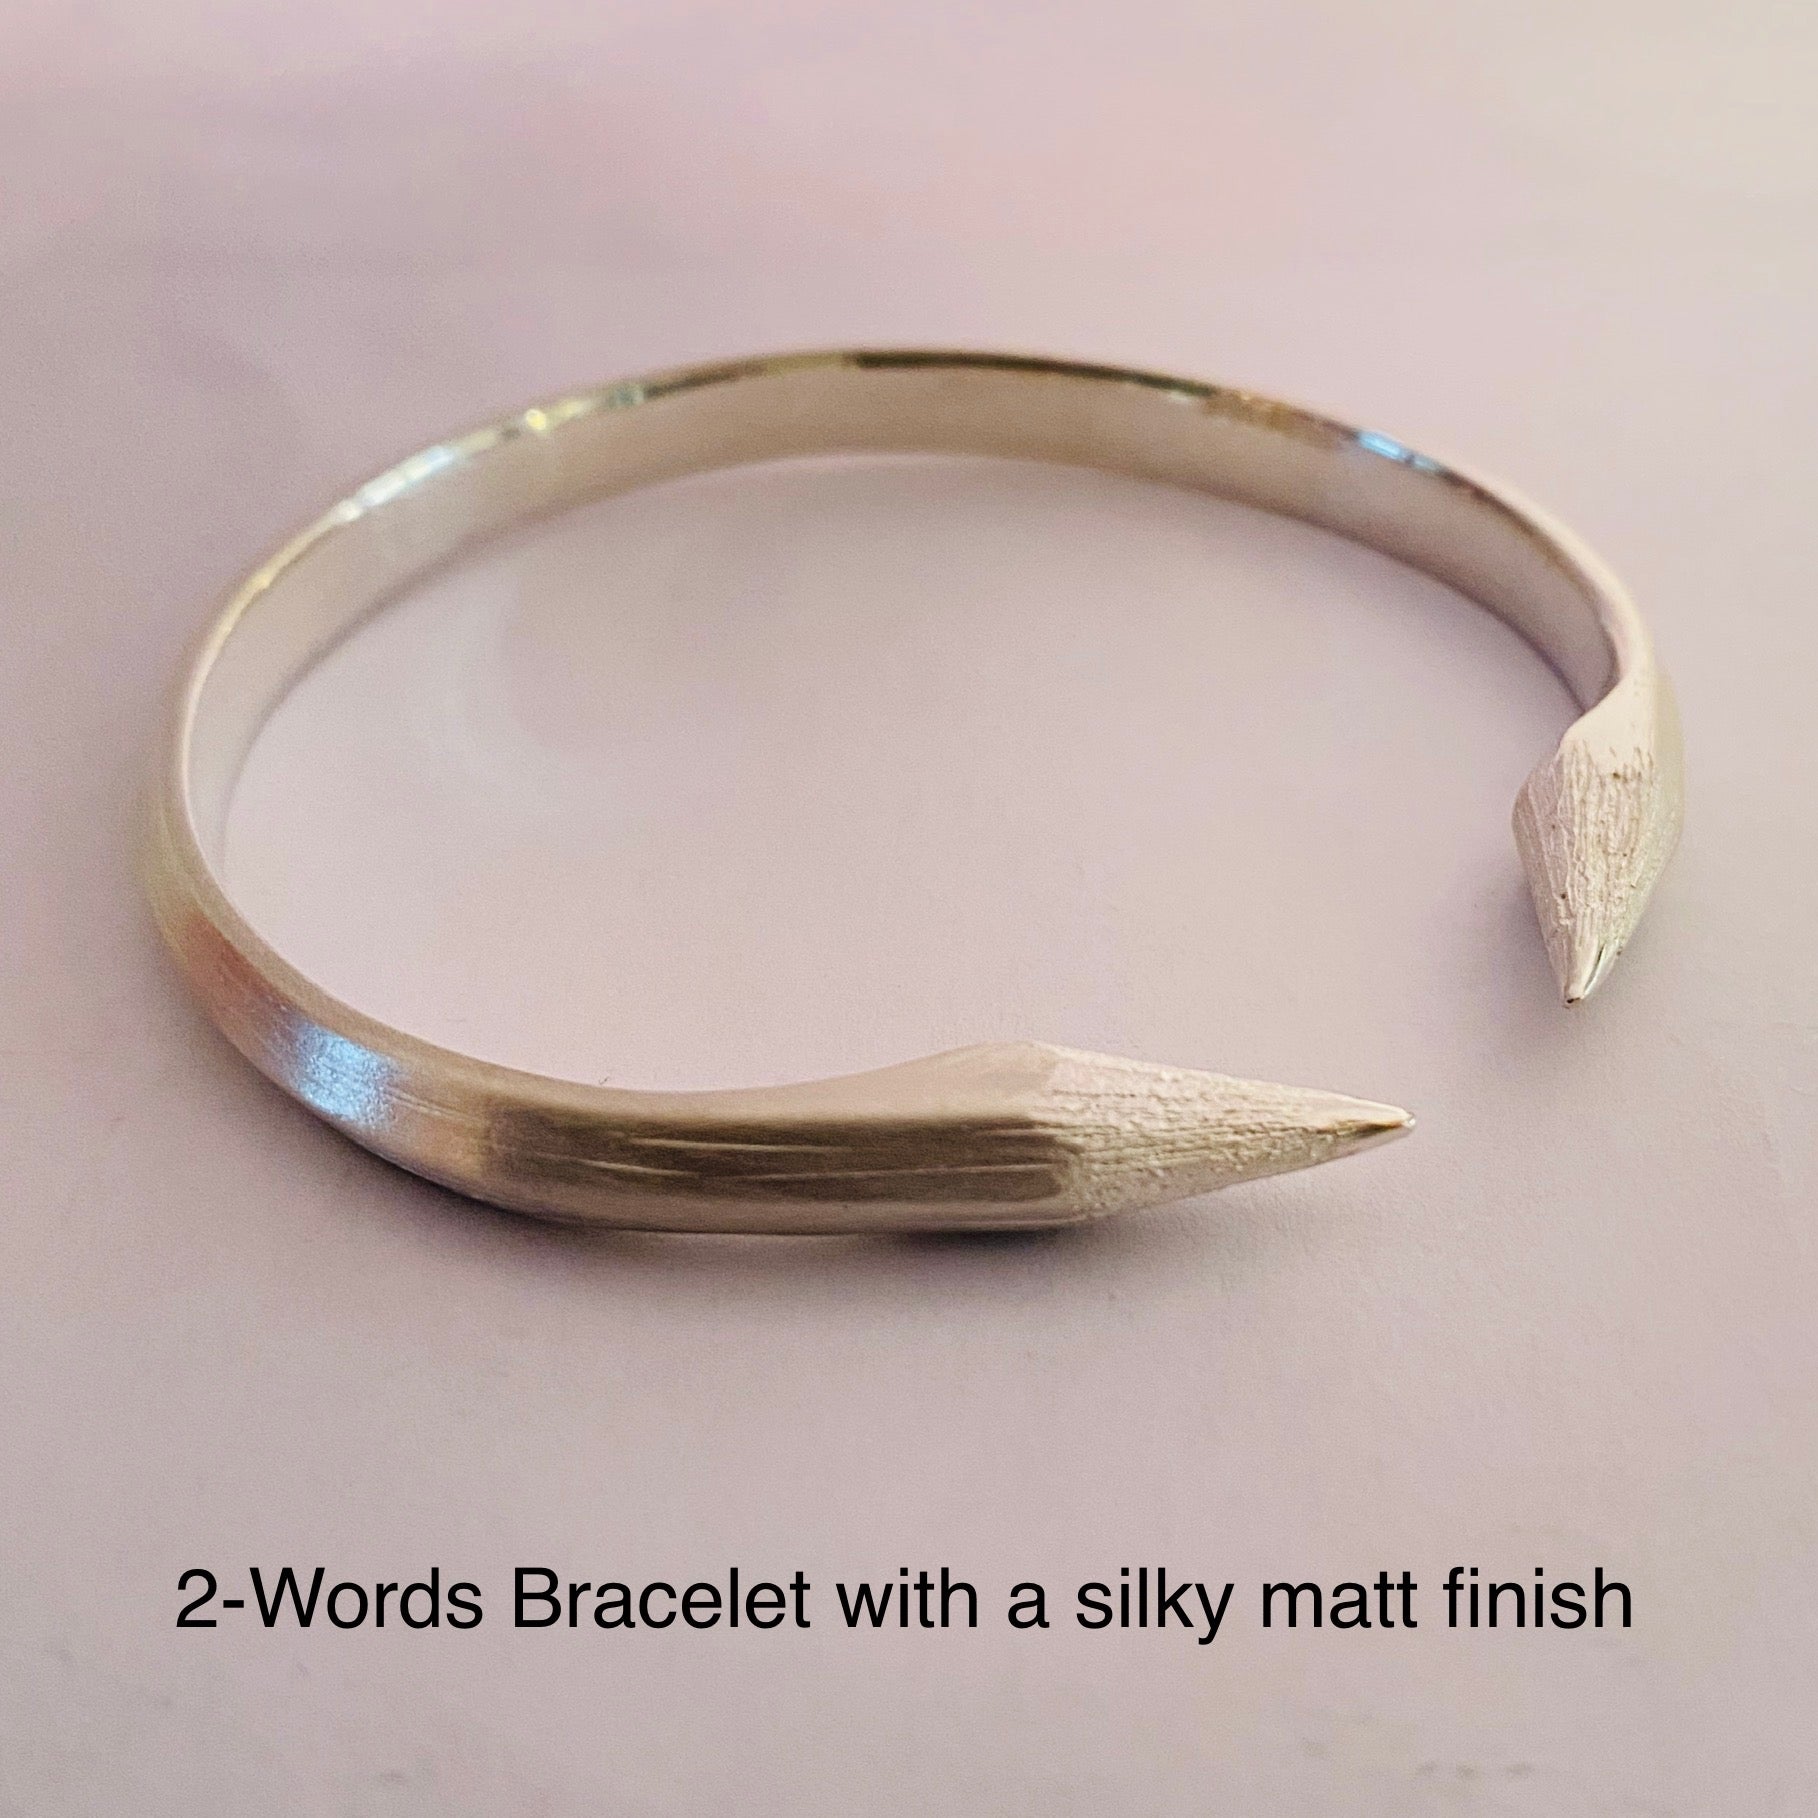 Sterling silver bracelet or bangle made from a real pencil. wit 2 pencil-heads almost meeting at the ends